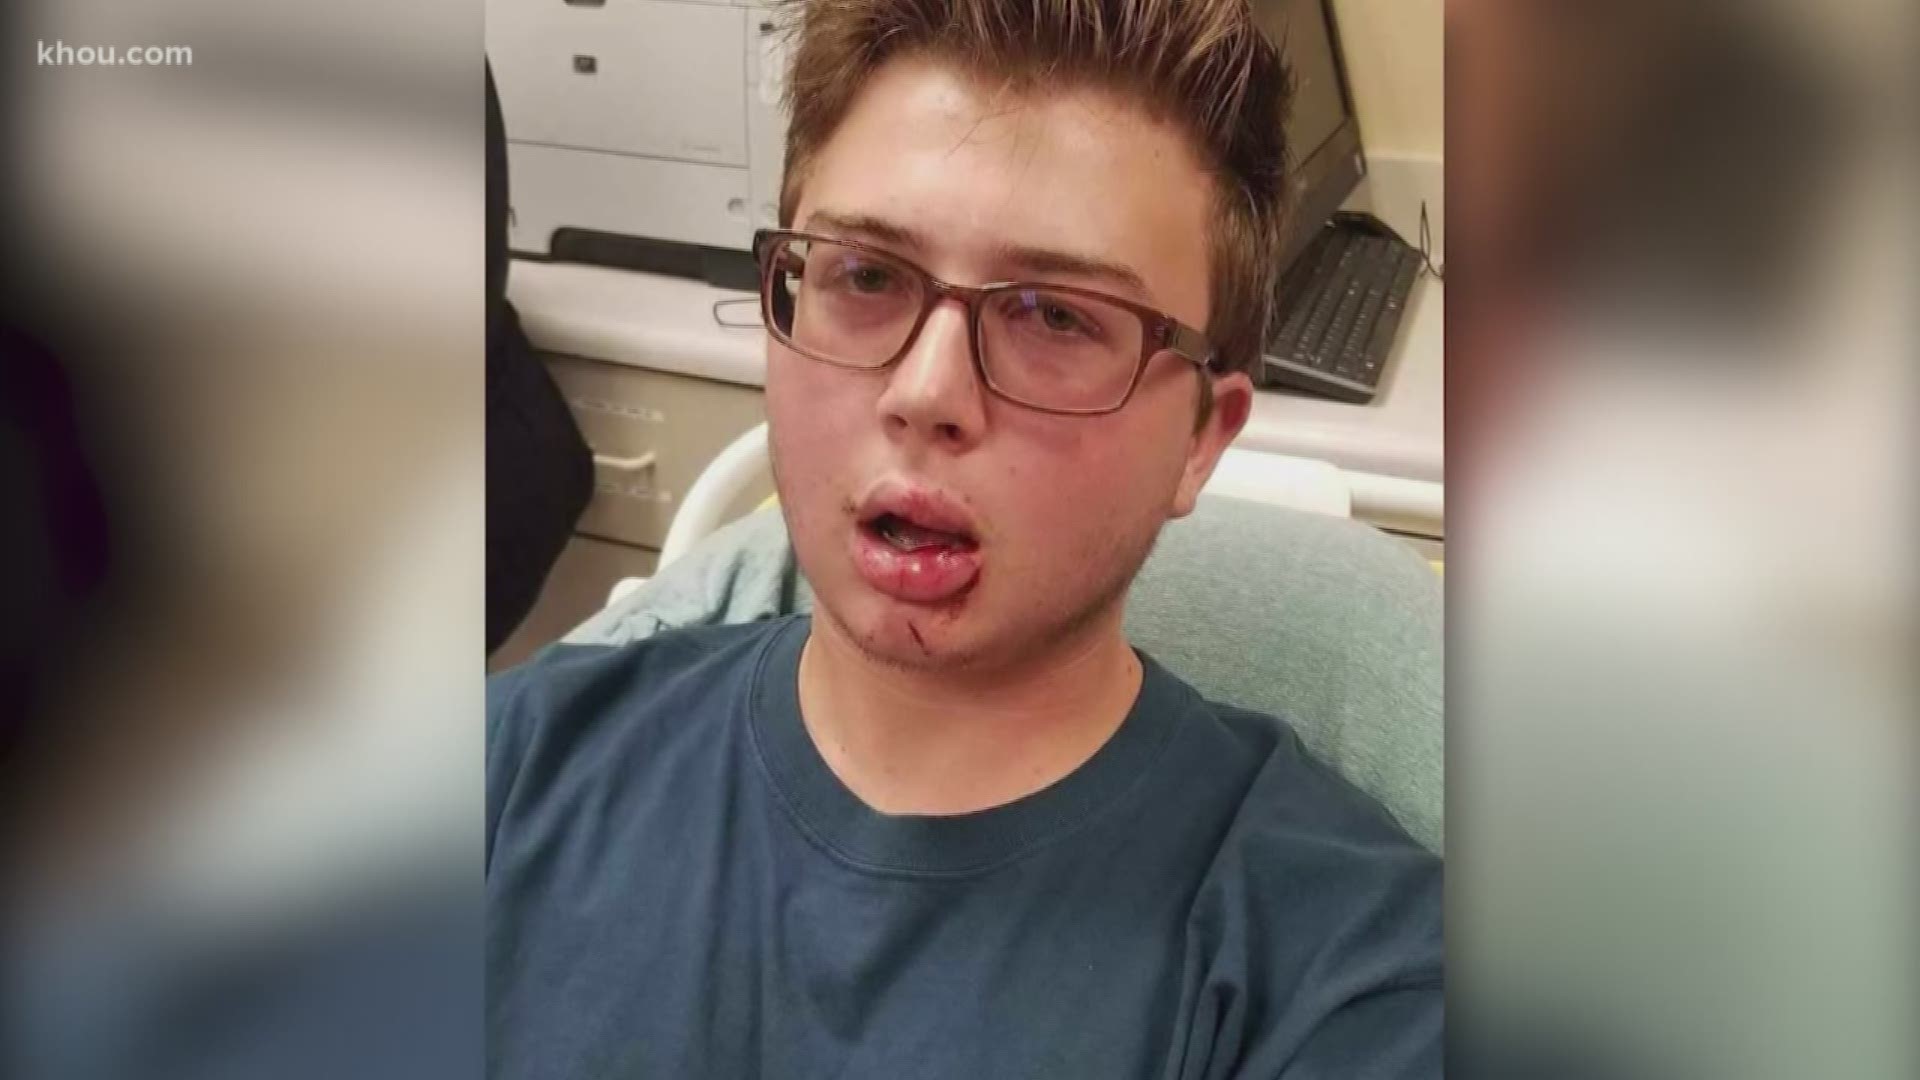 A college student is recovering after he was hit by a foul ball at Minute Maid Park on Saturday night during the Houston Astros game against the New York Yankees.